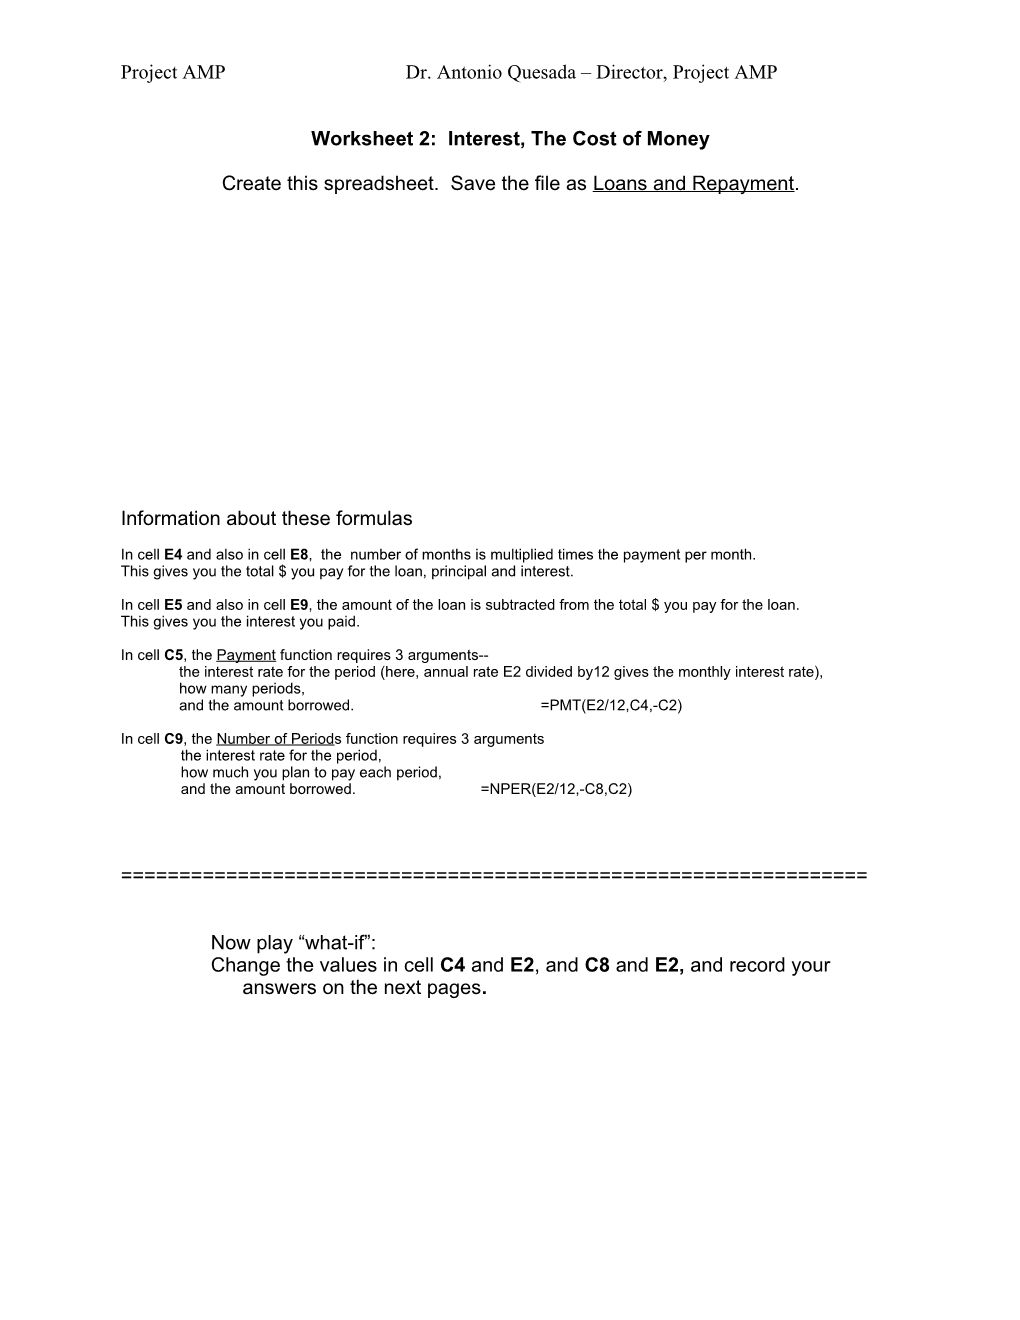 Worksheet 2: Interest, the Cost of Money